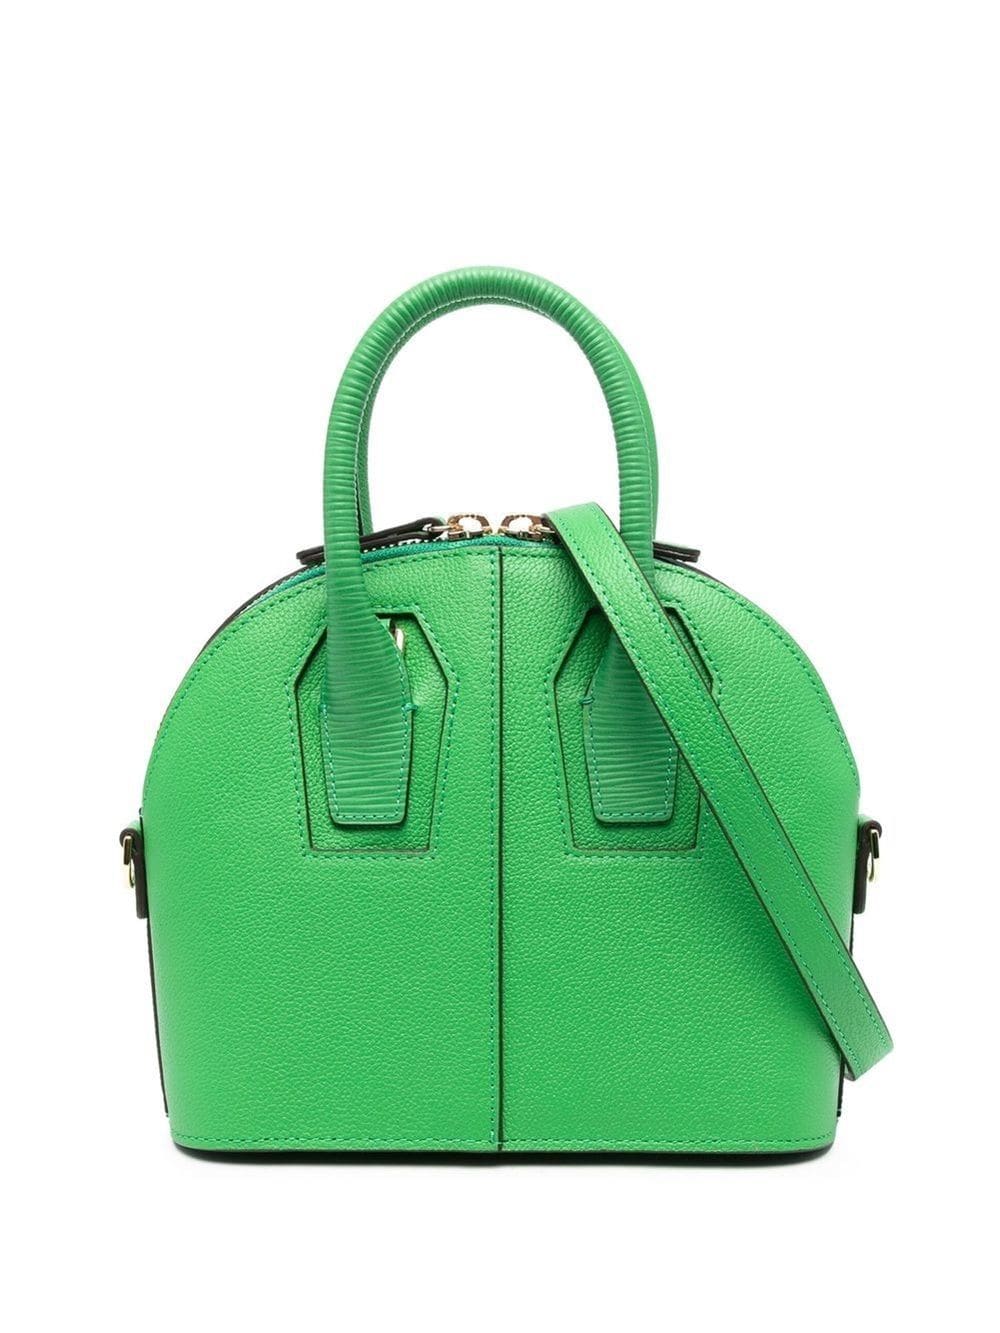 Oui Oui Merci Grained-leather Tote Bag In Green